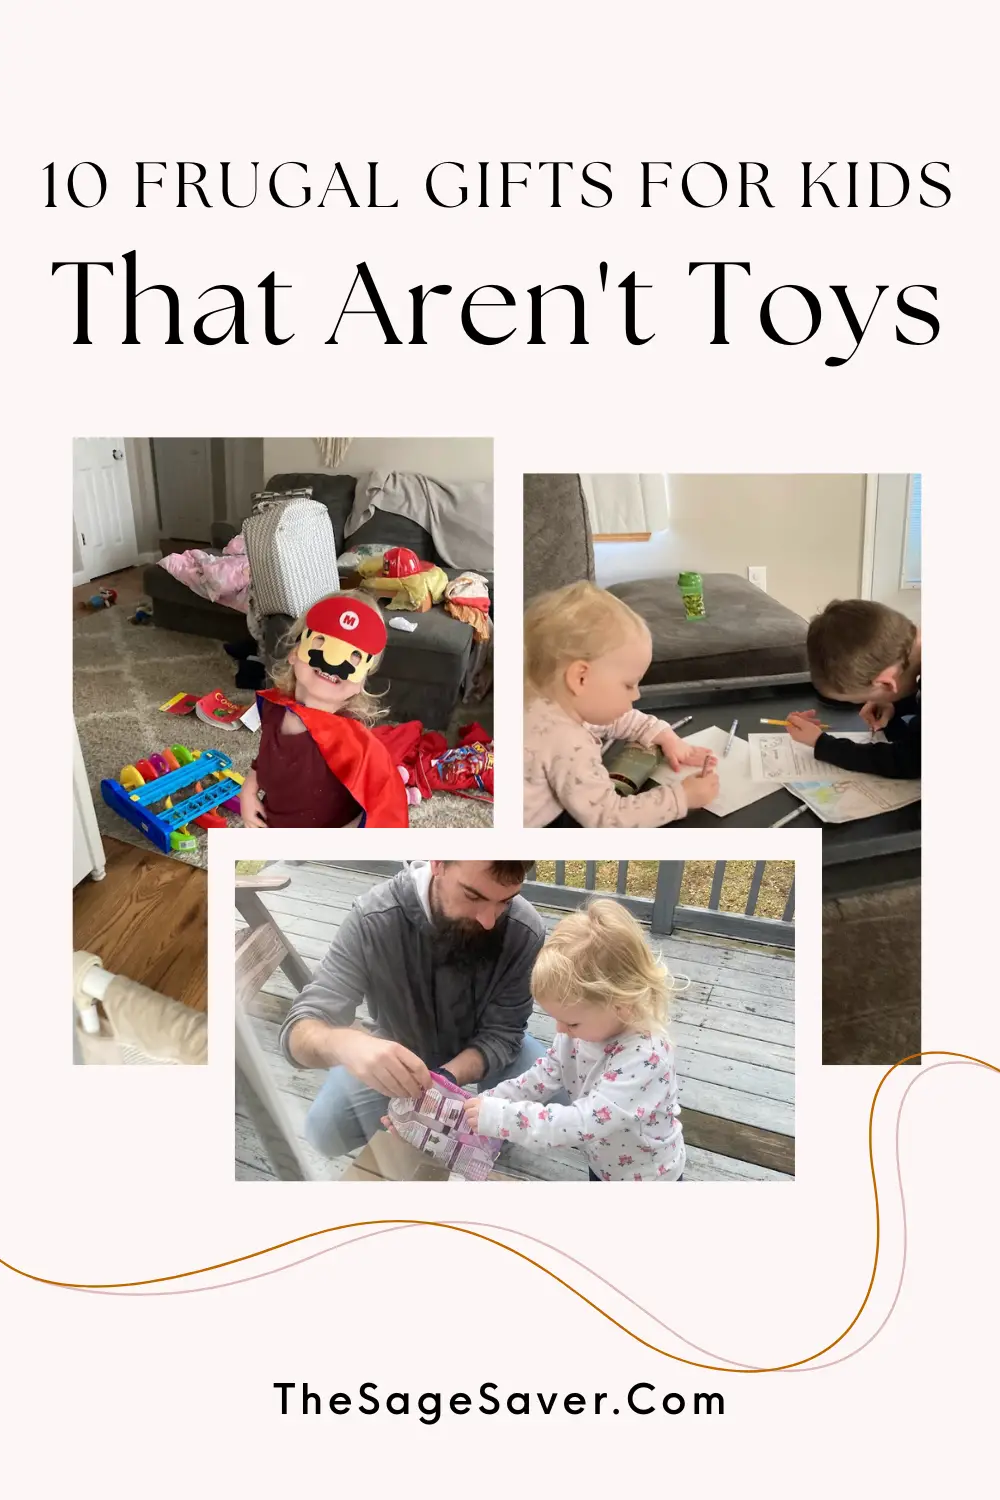 10 Frugal Gifts for Kids That Aren’t Toys They’ll Love